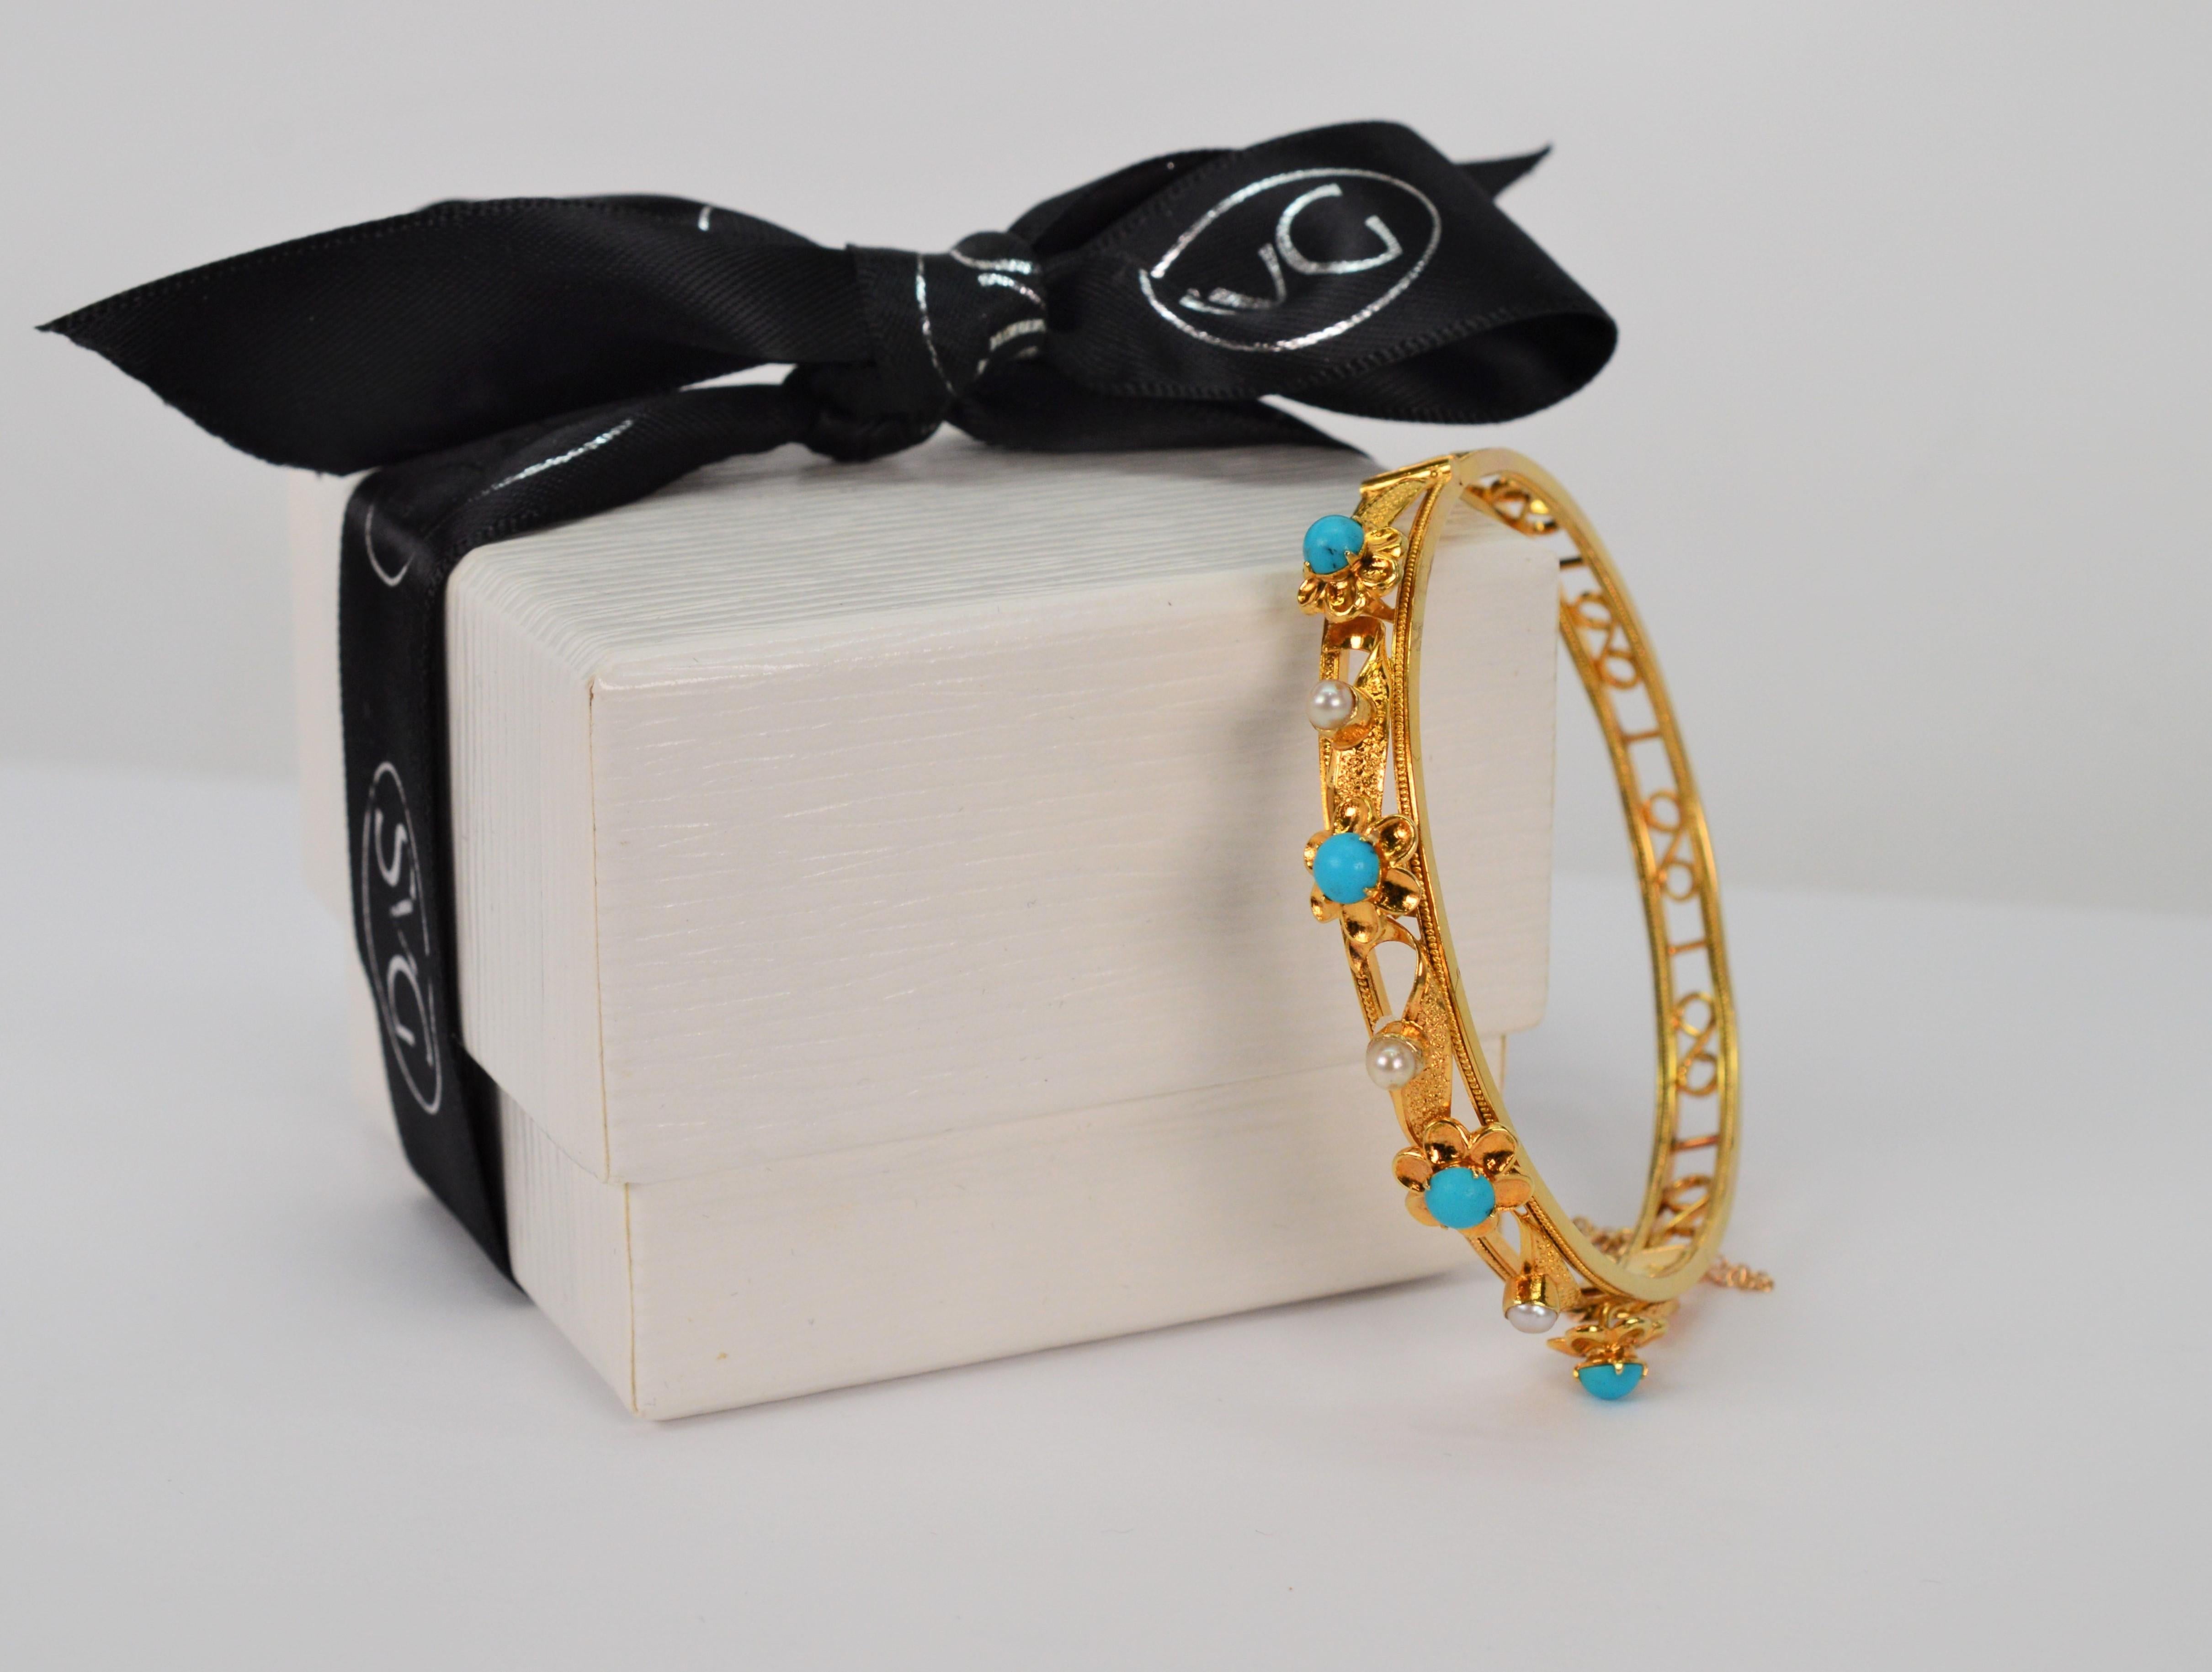 14 Karat Yellow Gold Filigree Bangle Bracelet with Turquoise and Pearl Accents 2